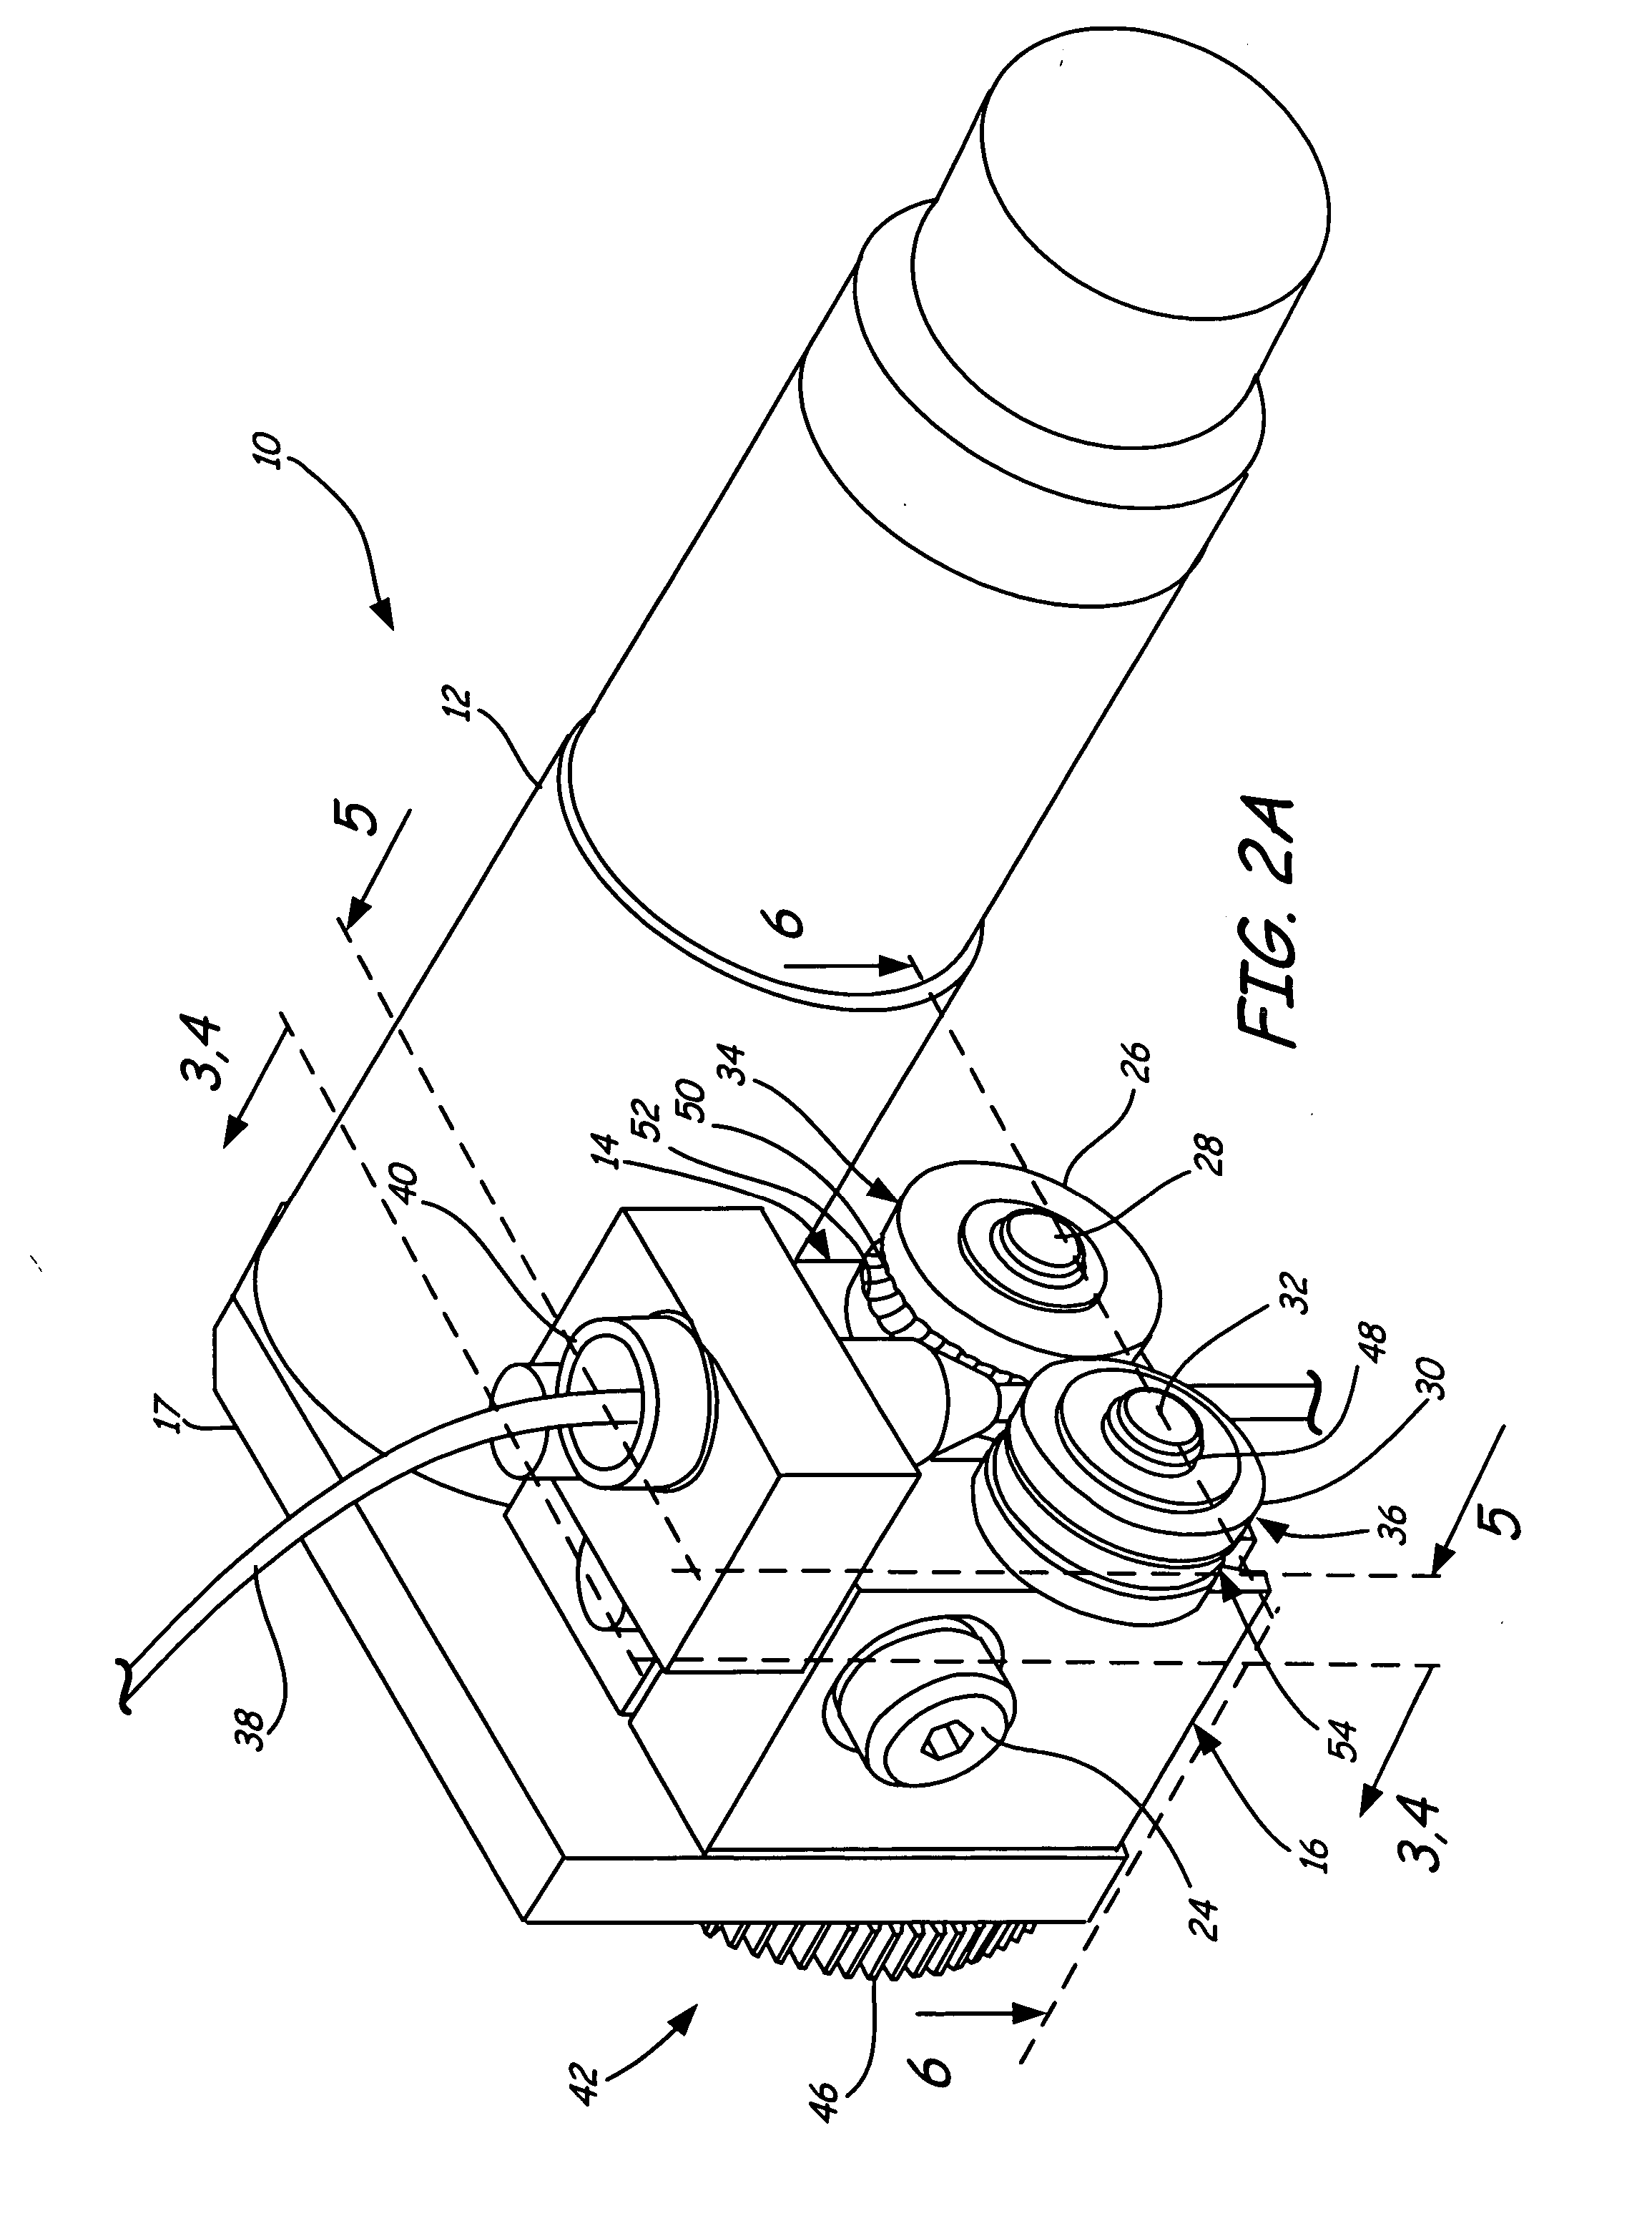 Rapid prototyping system with controlled material feedstock